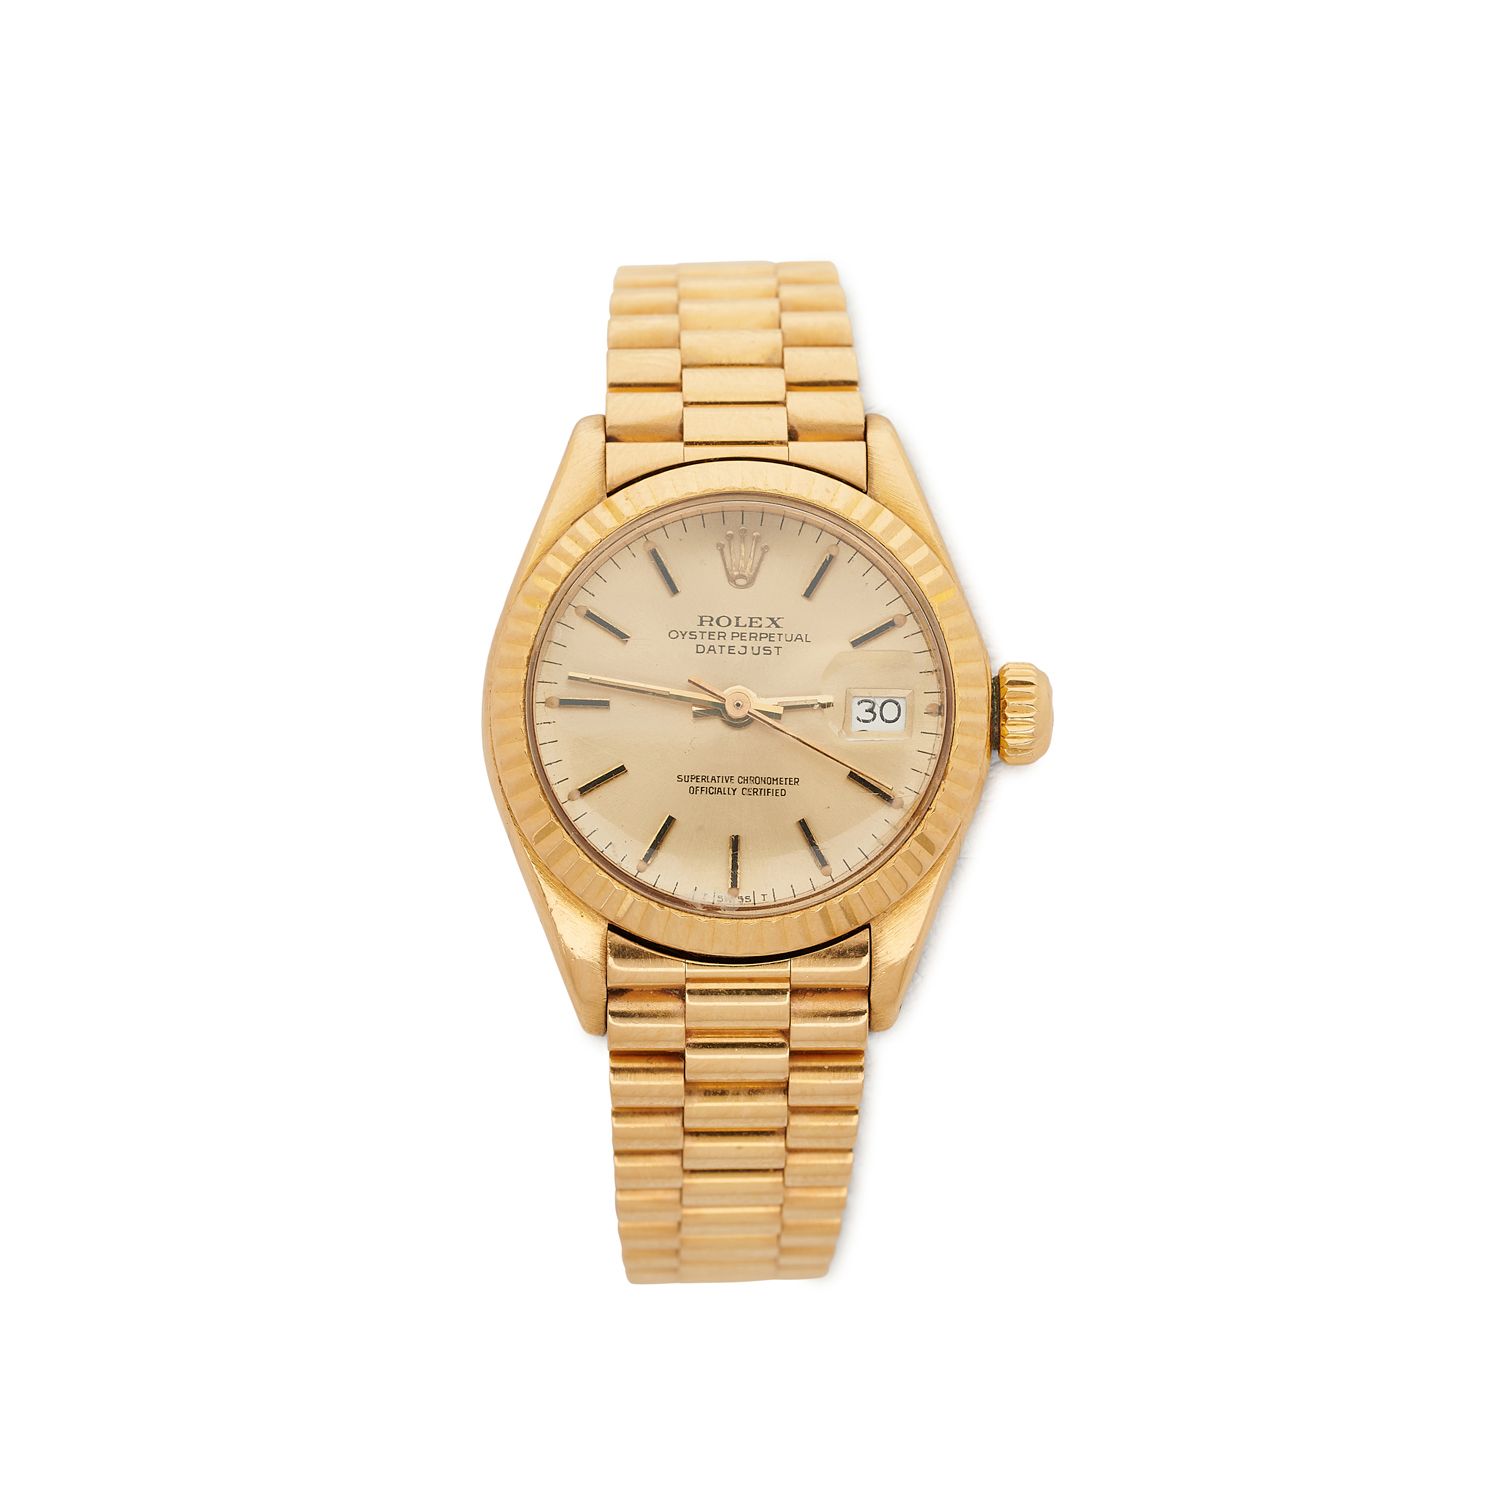 ROLEX OYSTER PERPETUAL DATEJUST ROLEX

Oyster Perpetual Datejust

Ladies' wristw&hellip;